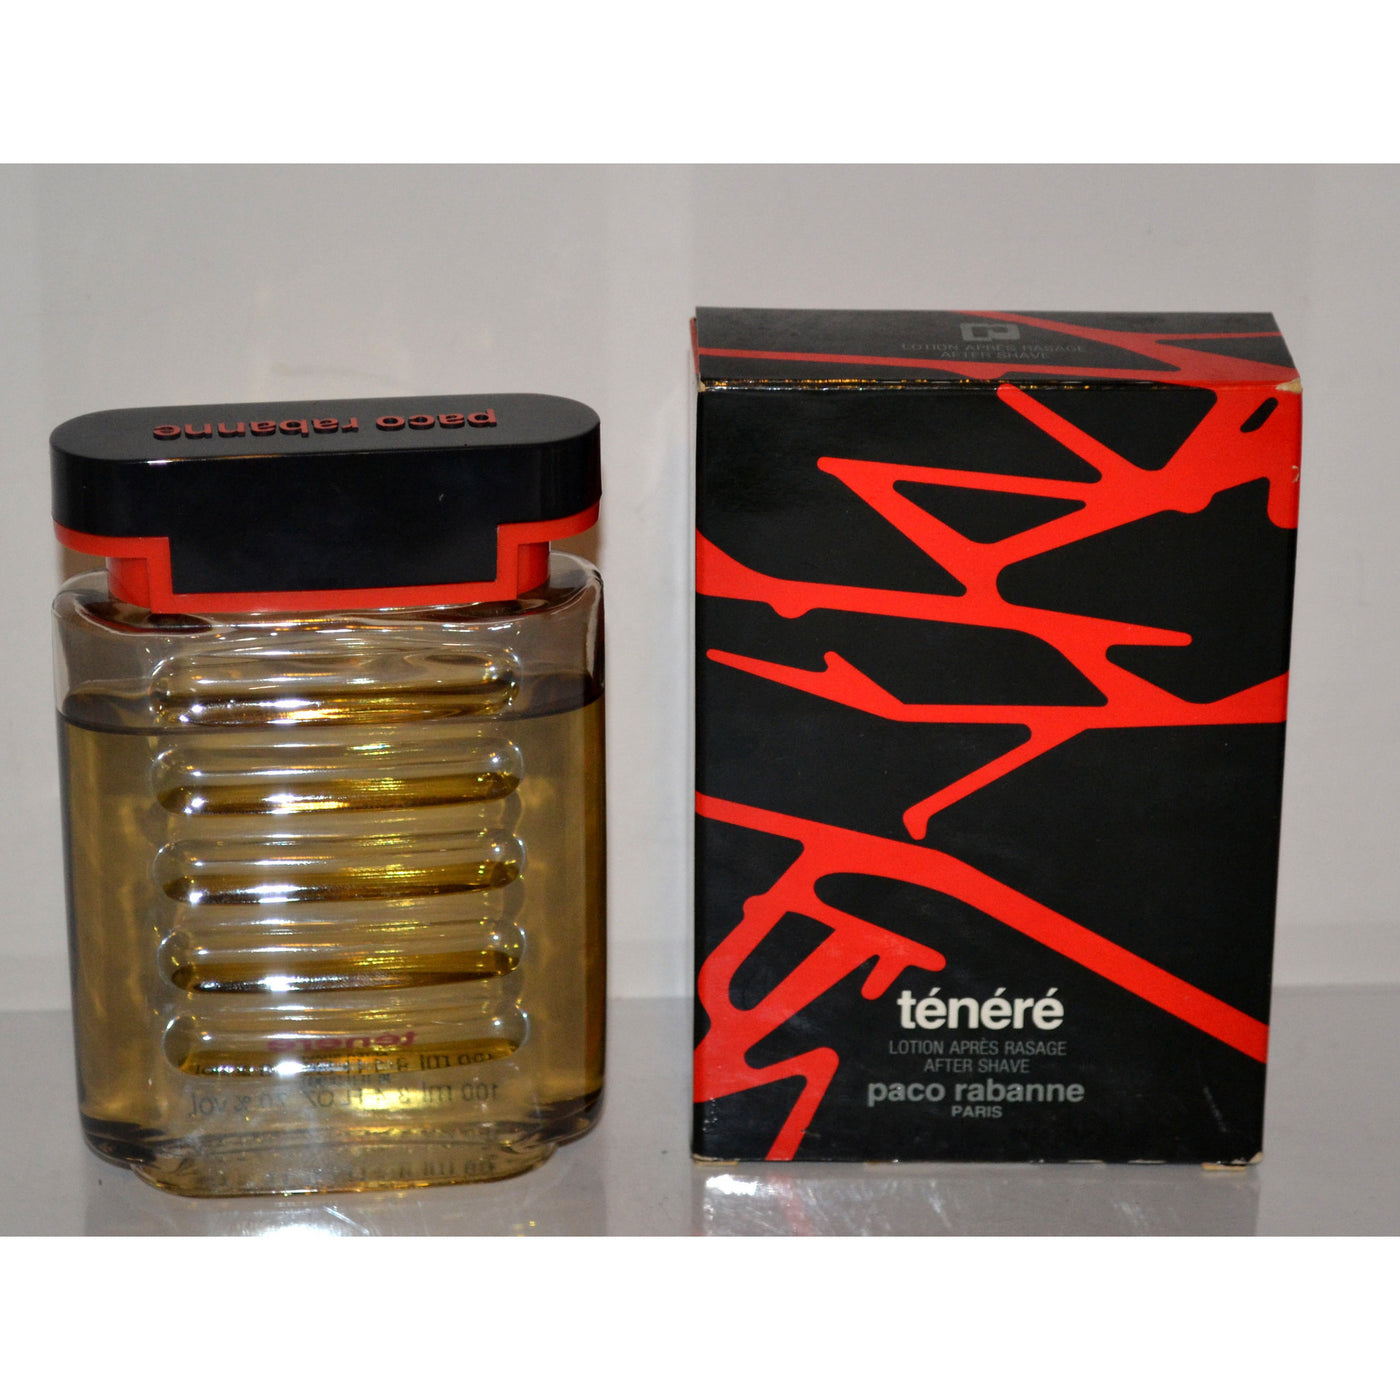 Vintage Tenere After Shave By Paco Rabanne